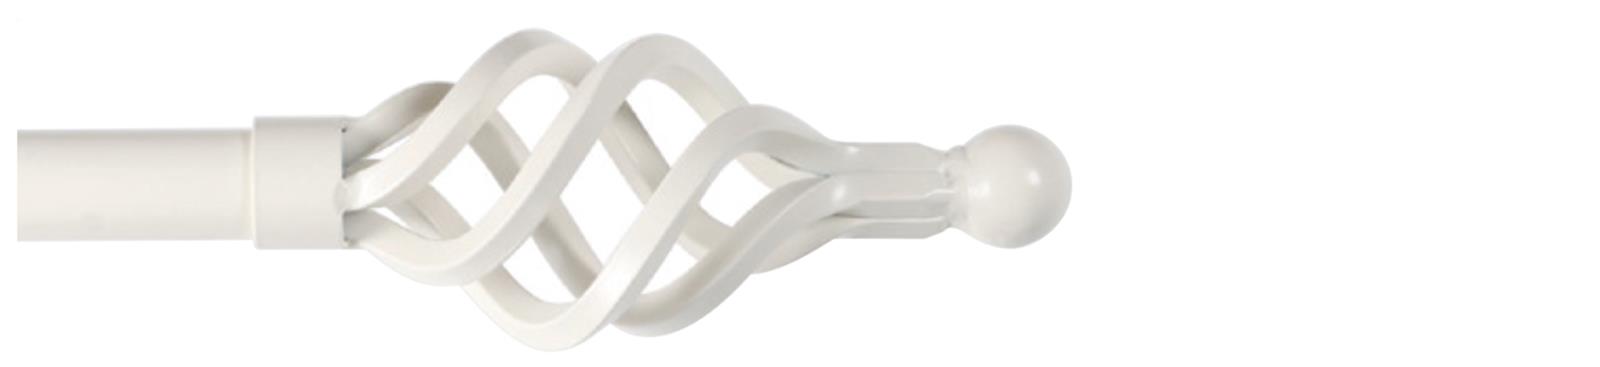 Cameron Fuller 32mm Metal Curtain Pole Chalk Cage